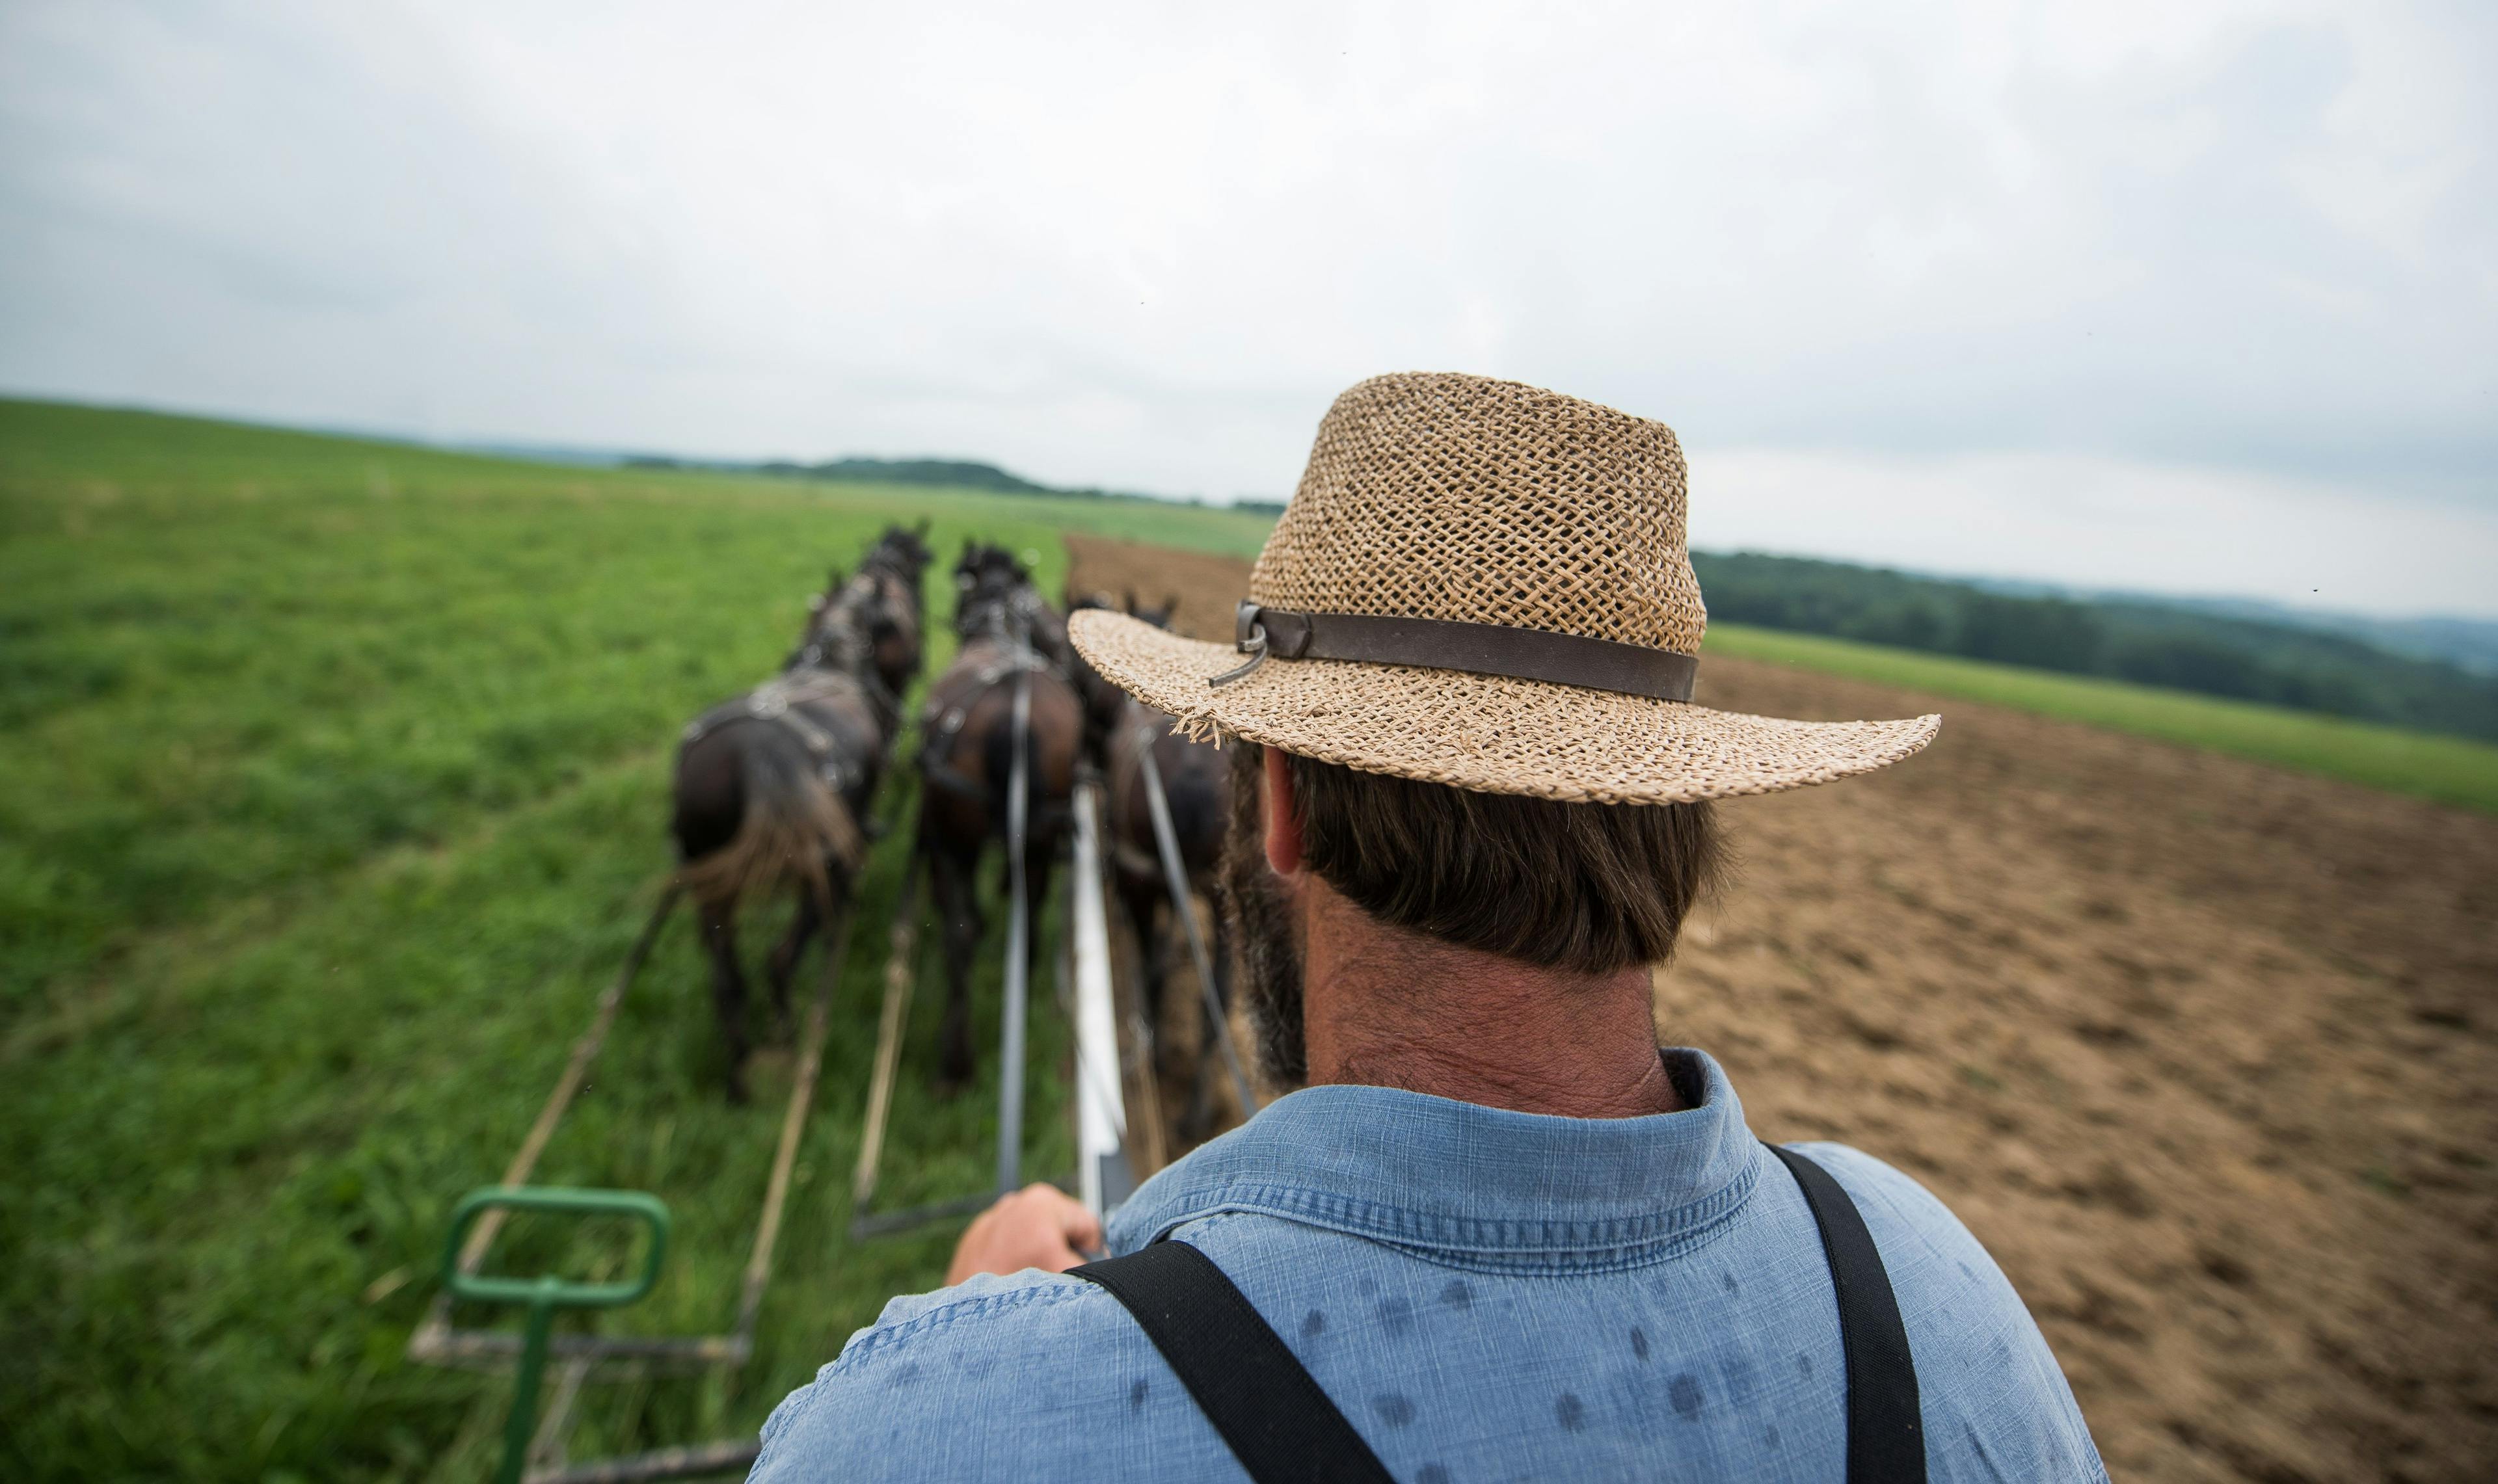 Organic farmer Jerry Miller plows a field at his Ohio farm using horses to pull the plow.